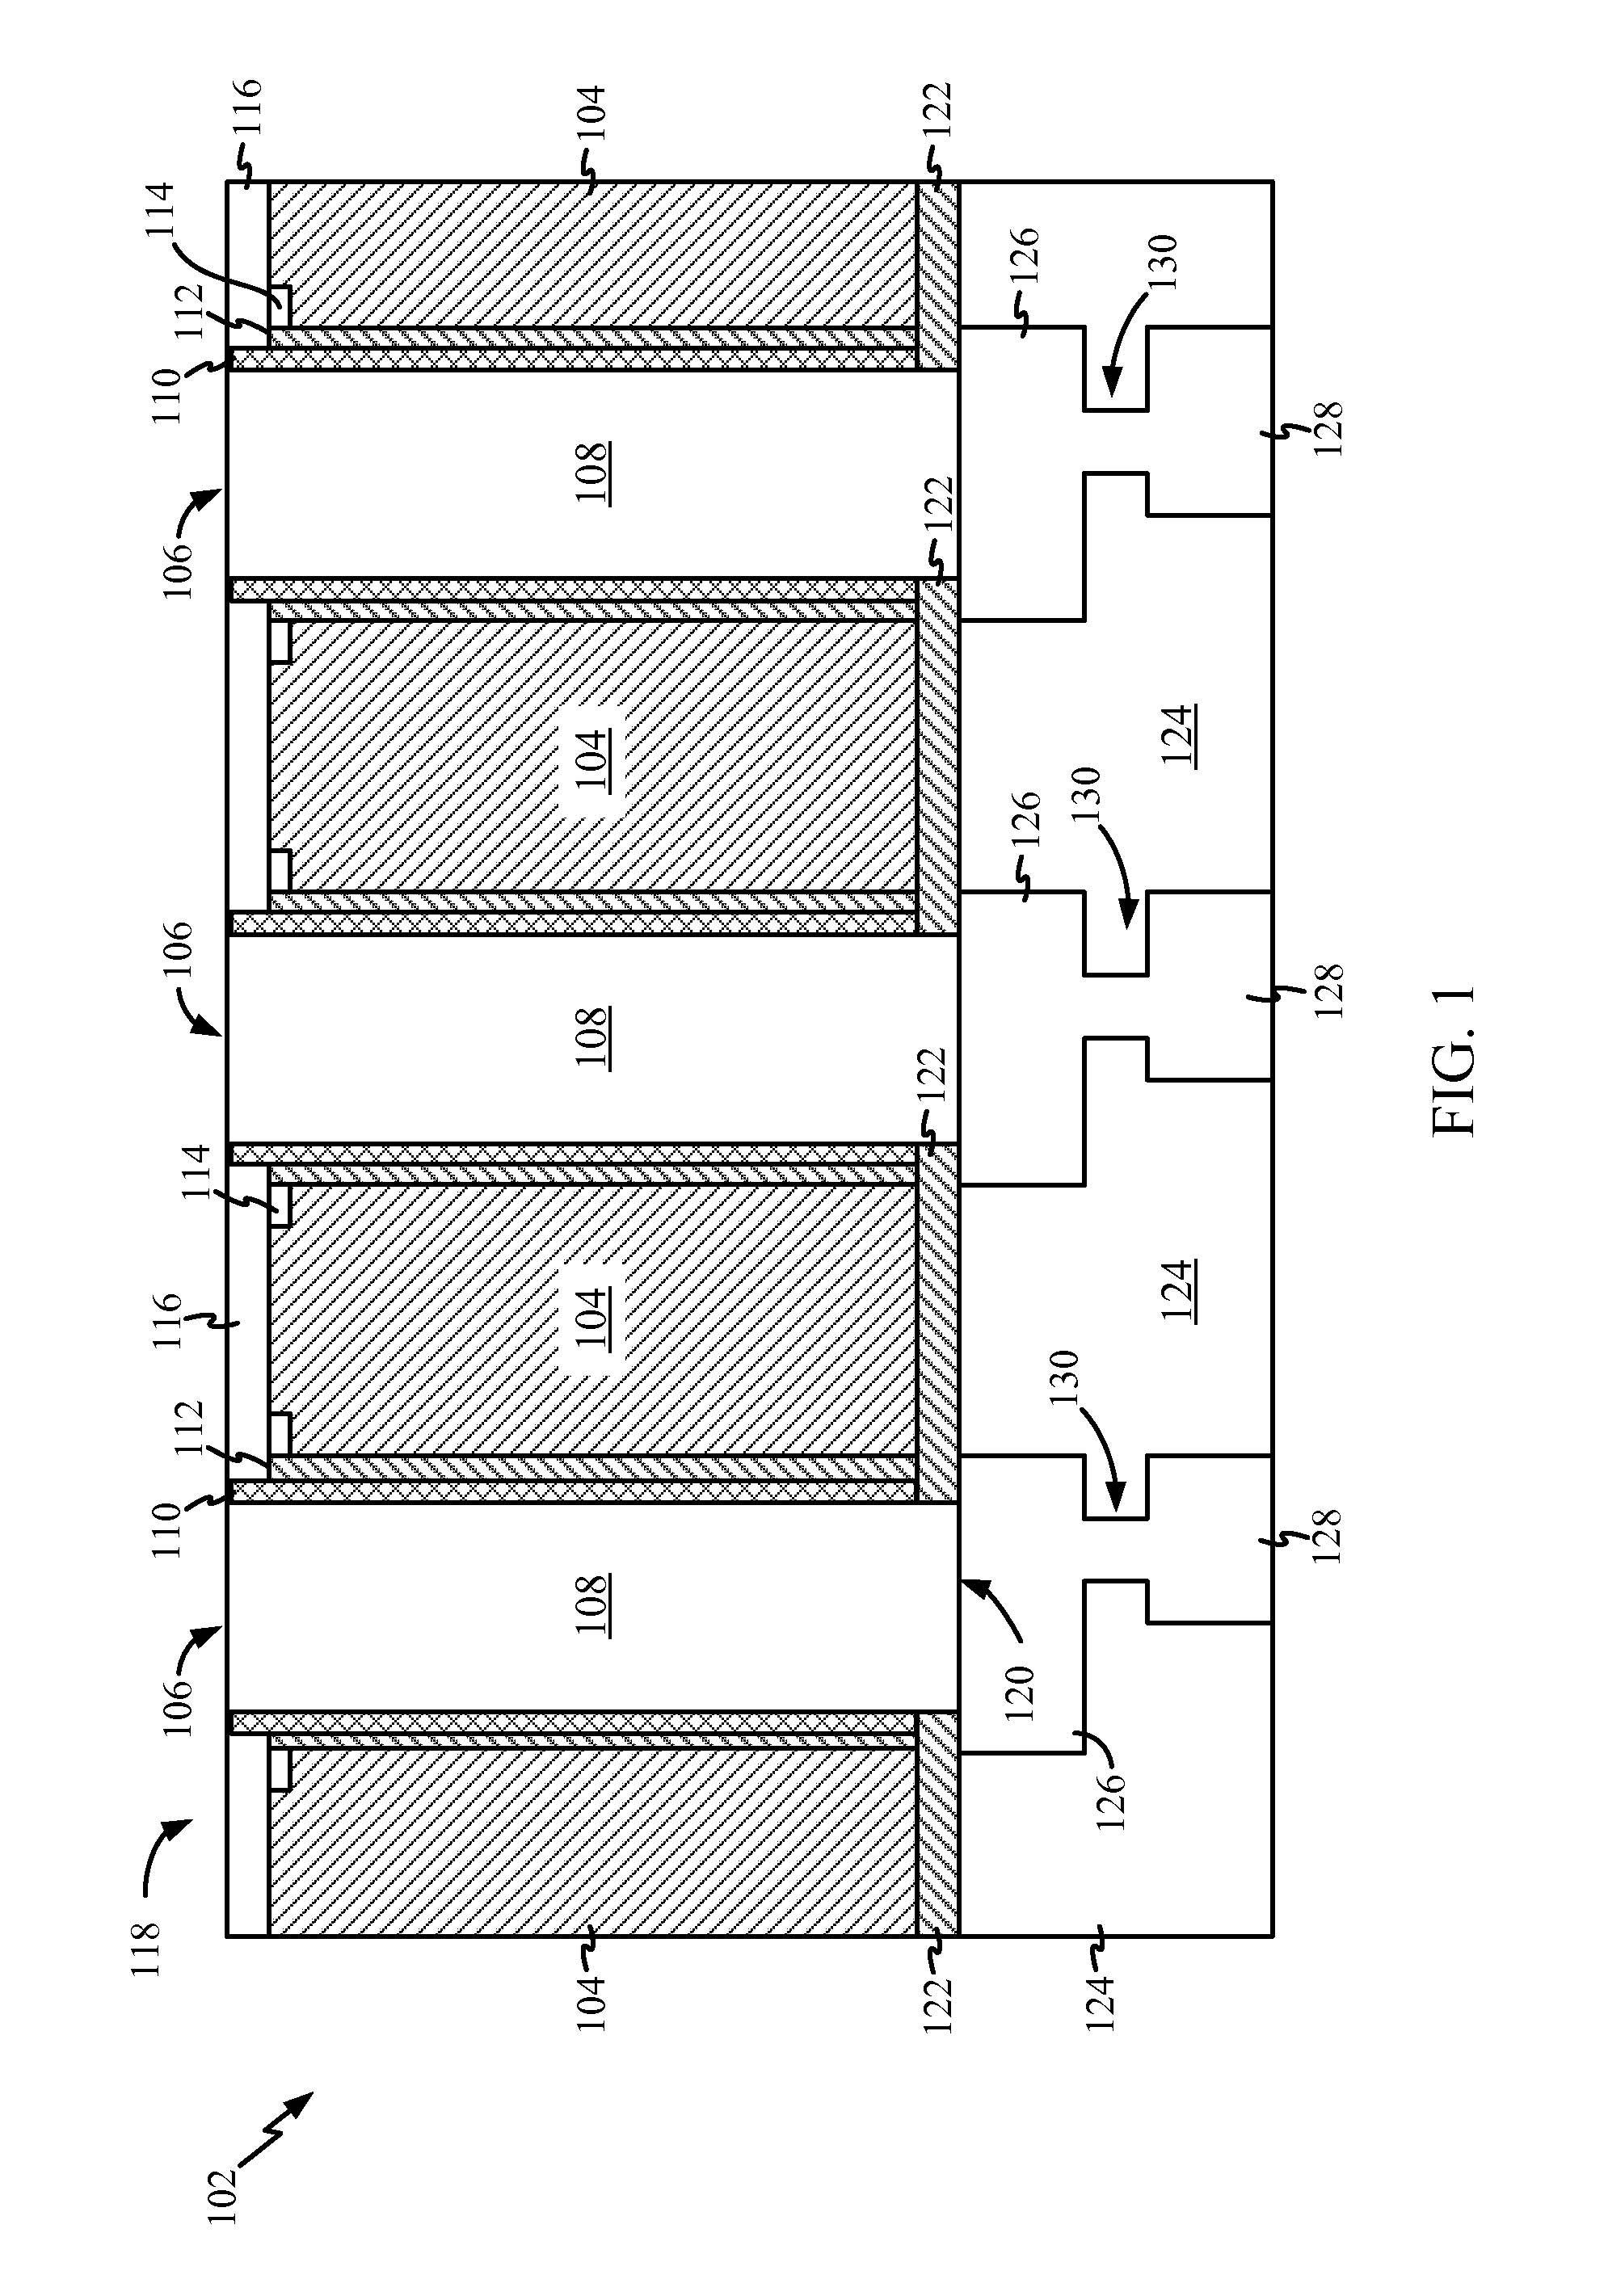 Via Structure Integrated in Electronic Substrate